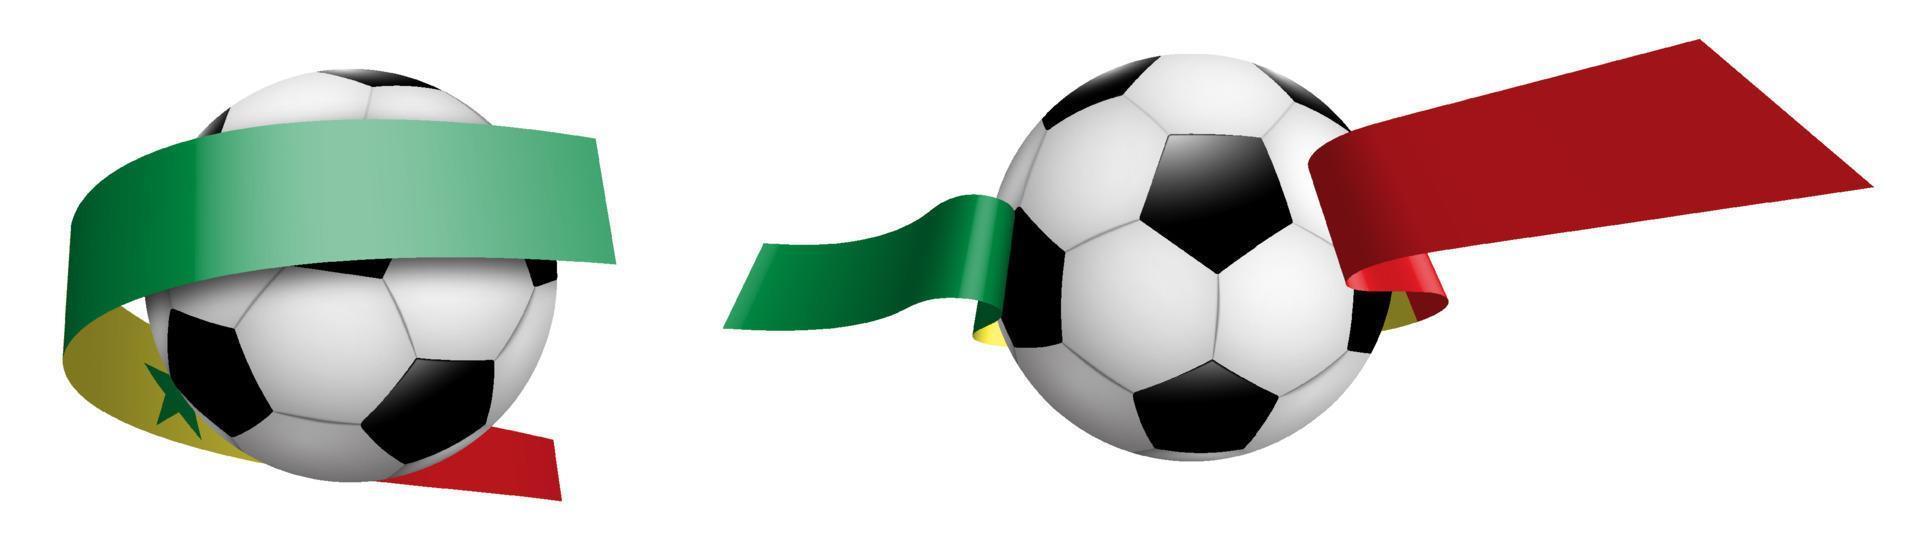 balls for soccer, classic football in ribbons with colors flag of republic of Senegal. Design element for football competitions. Isolated vector on white background